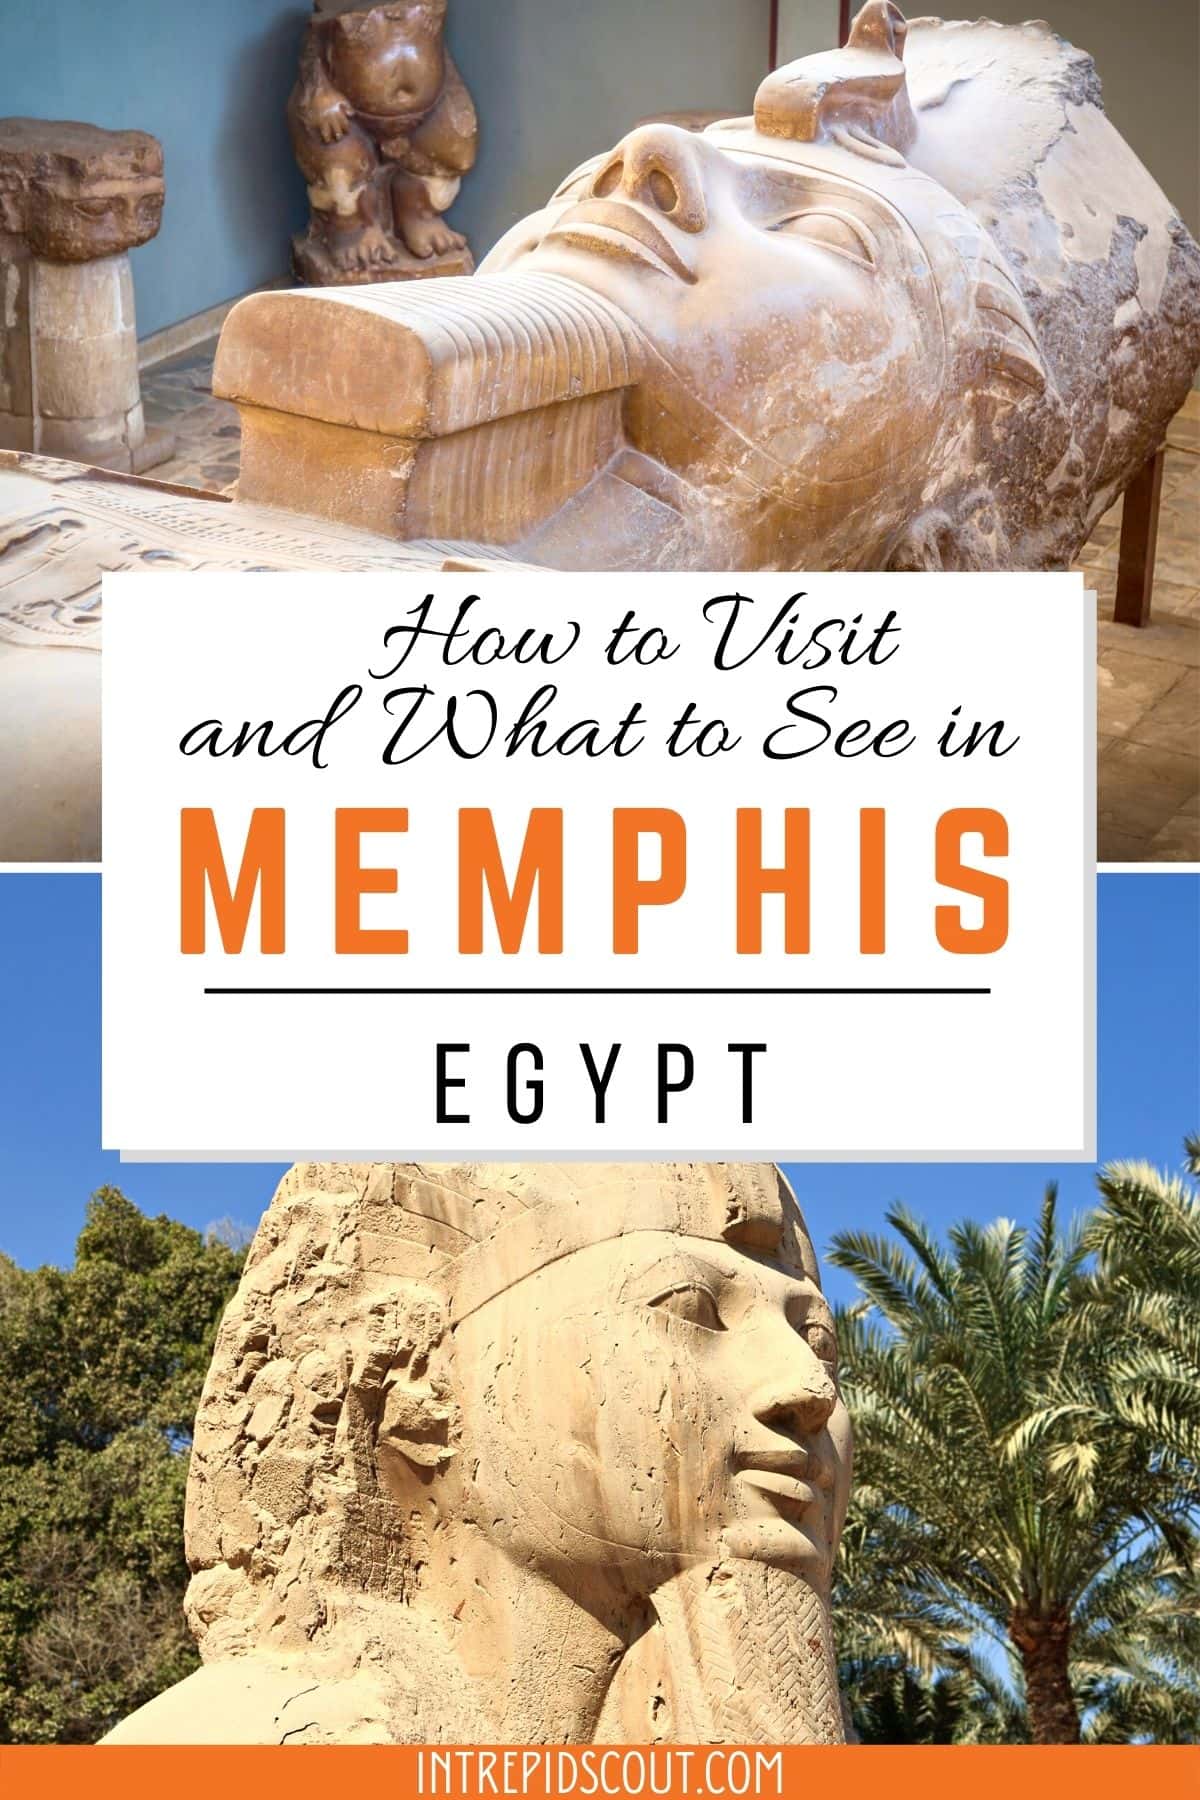 How to Visit and What to See in Memphis